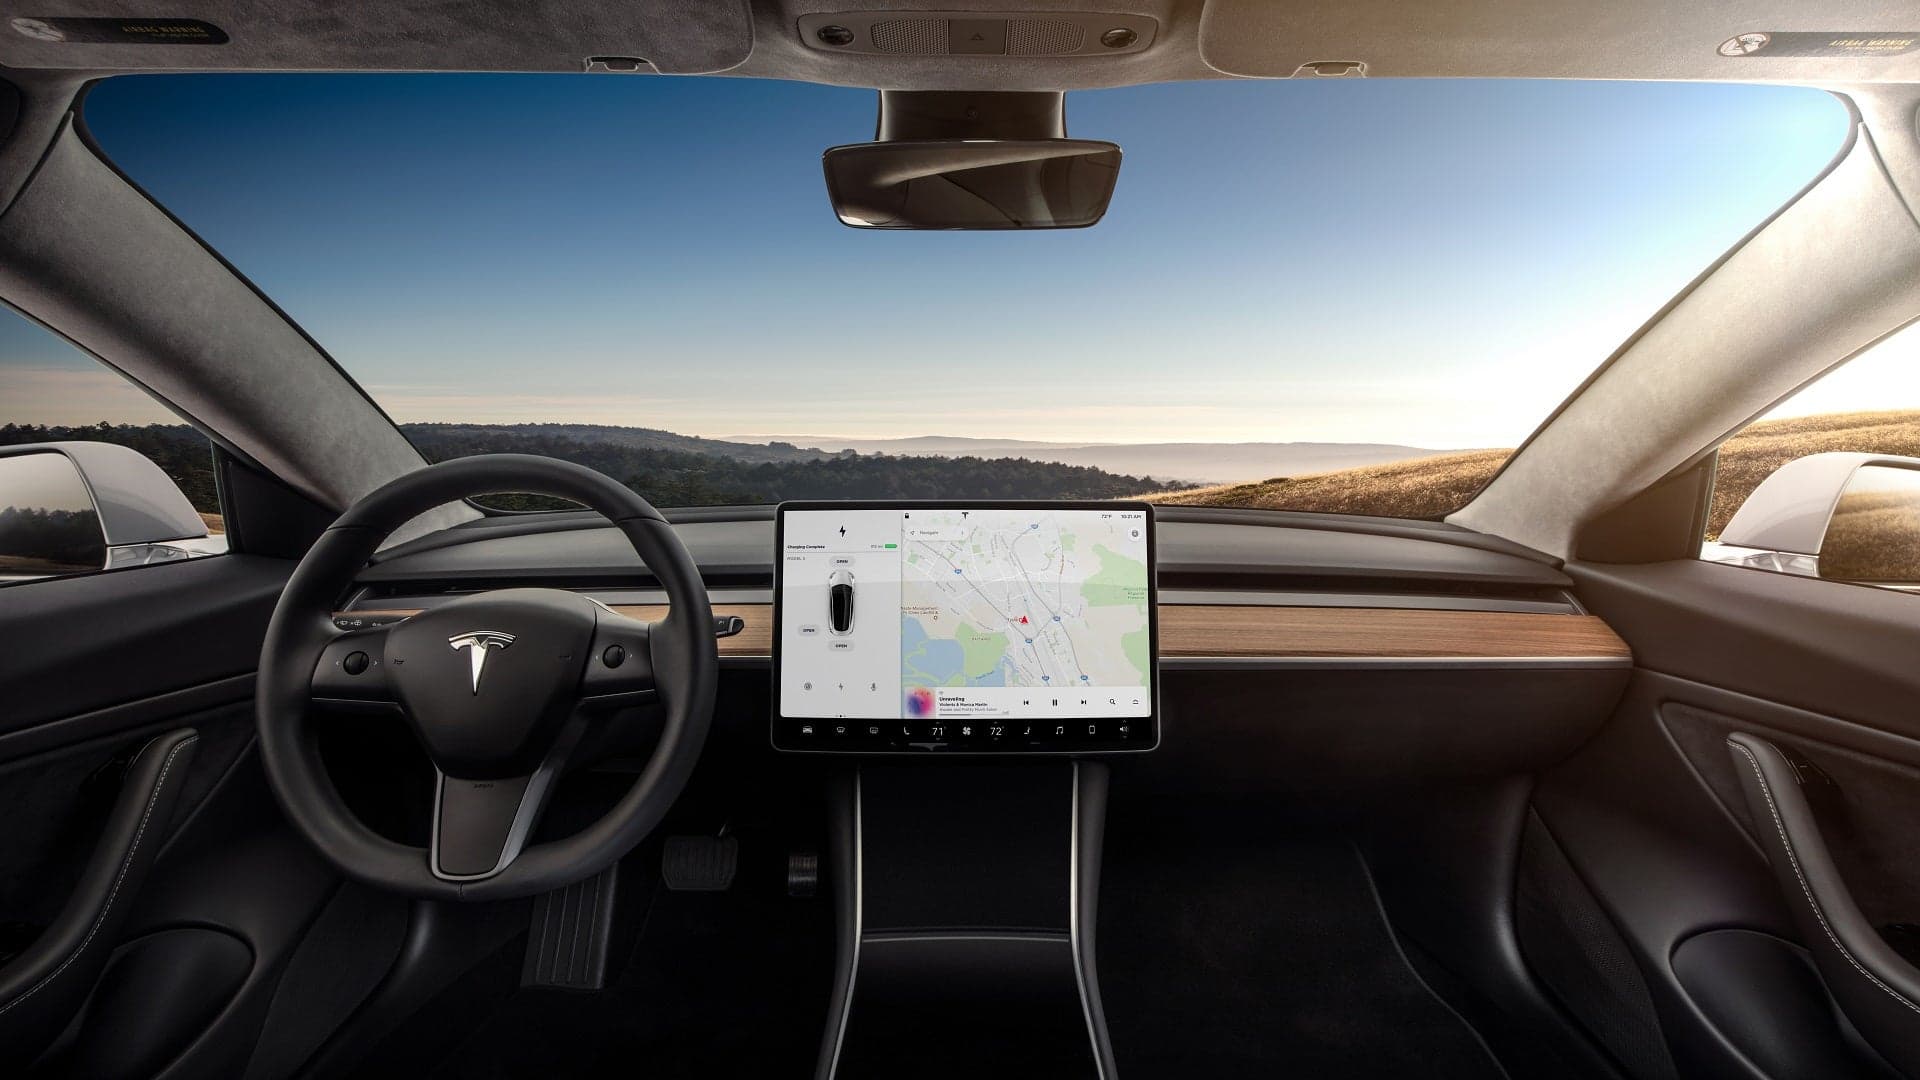 Check Out This Tesla Model 3 Touchscreen Mockup